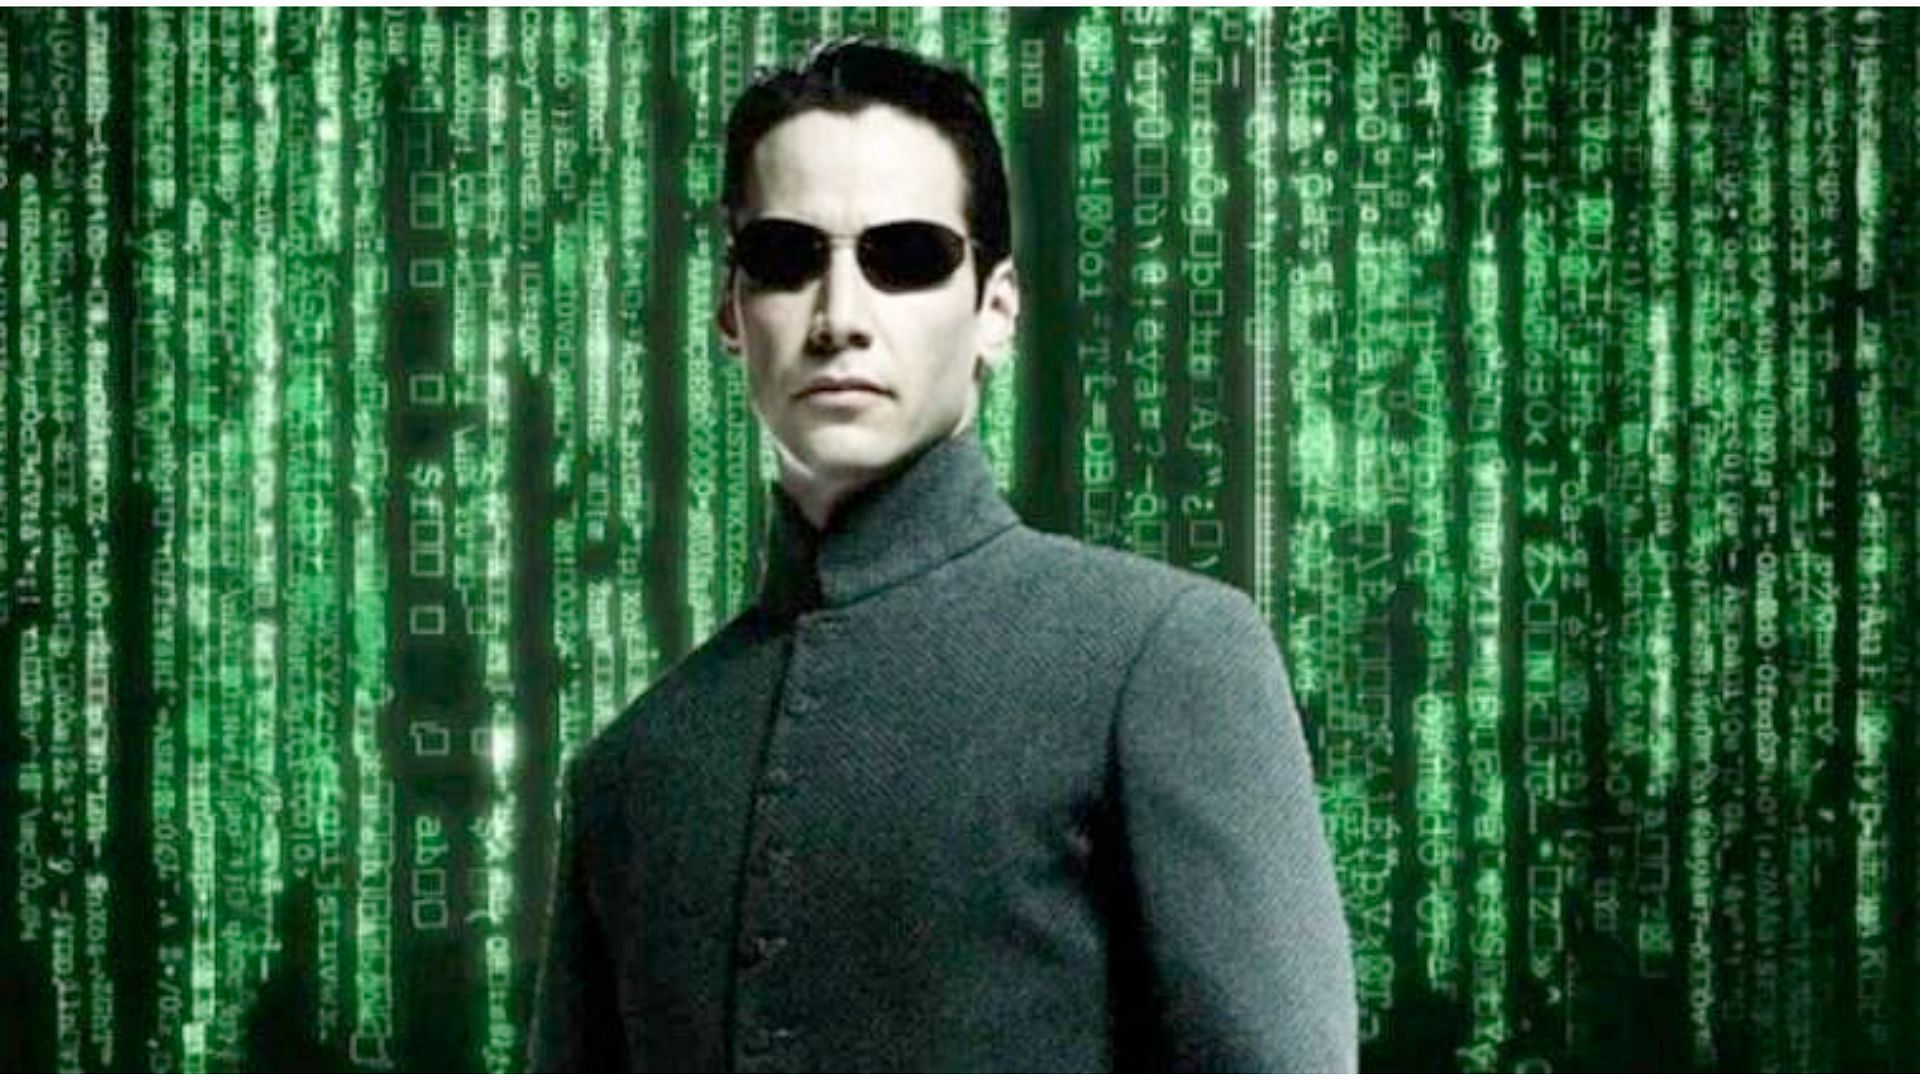 Actor Keanu Reeves played the main character in the Matrix trilogy (Image via Getty/Warner Bros Repository)